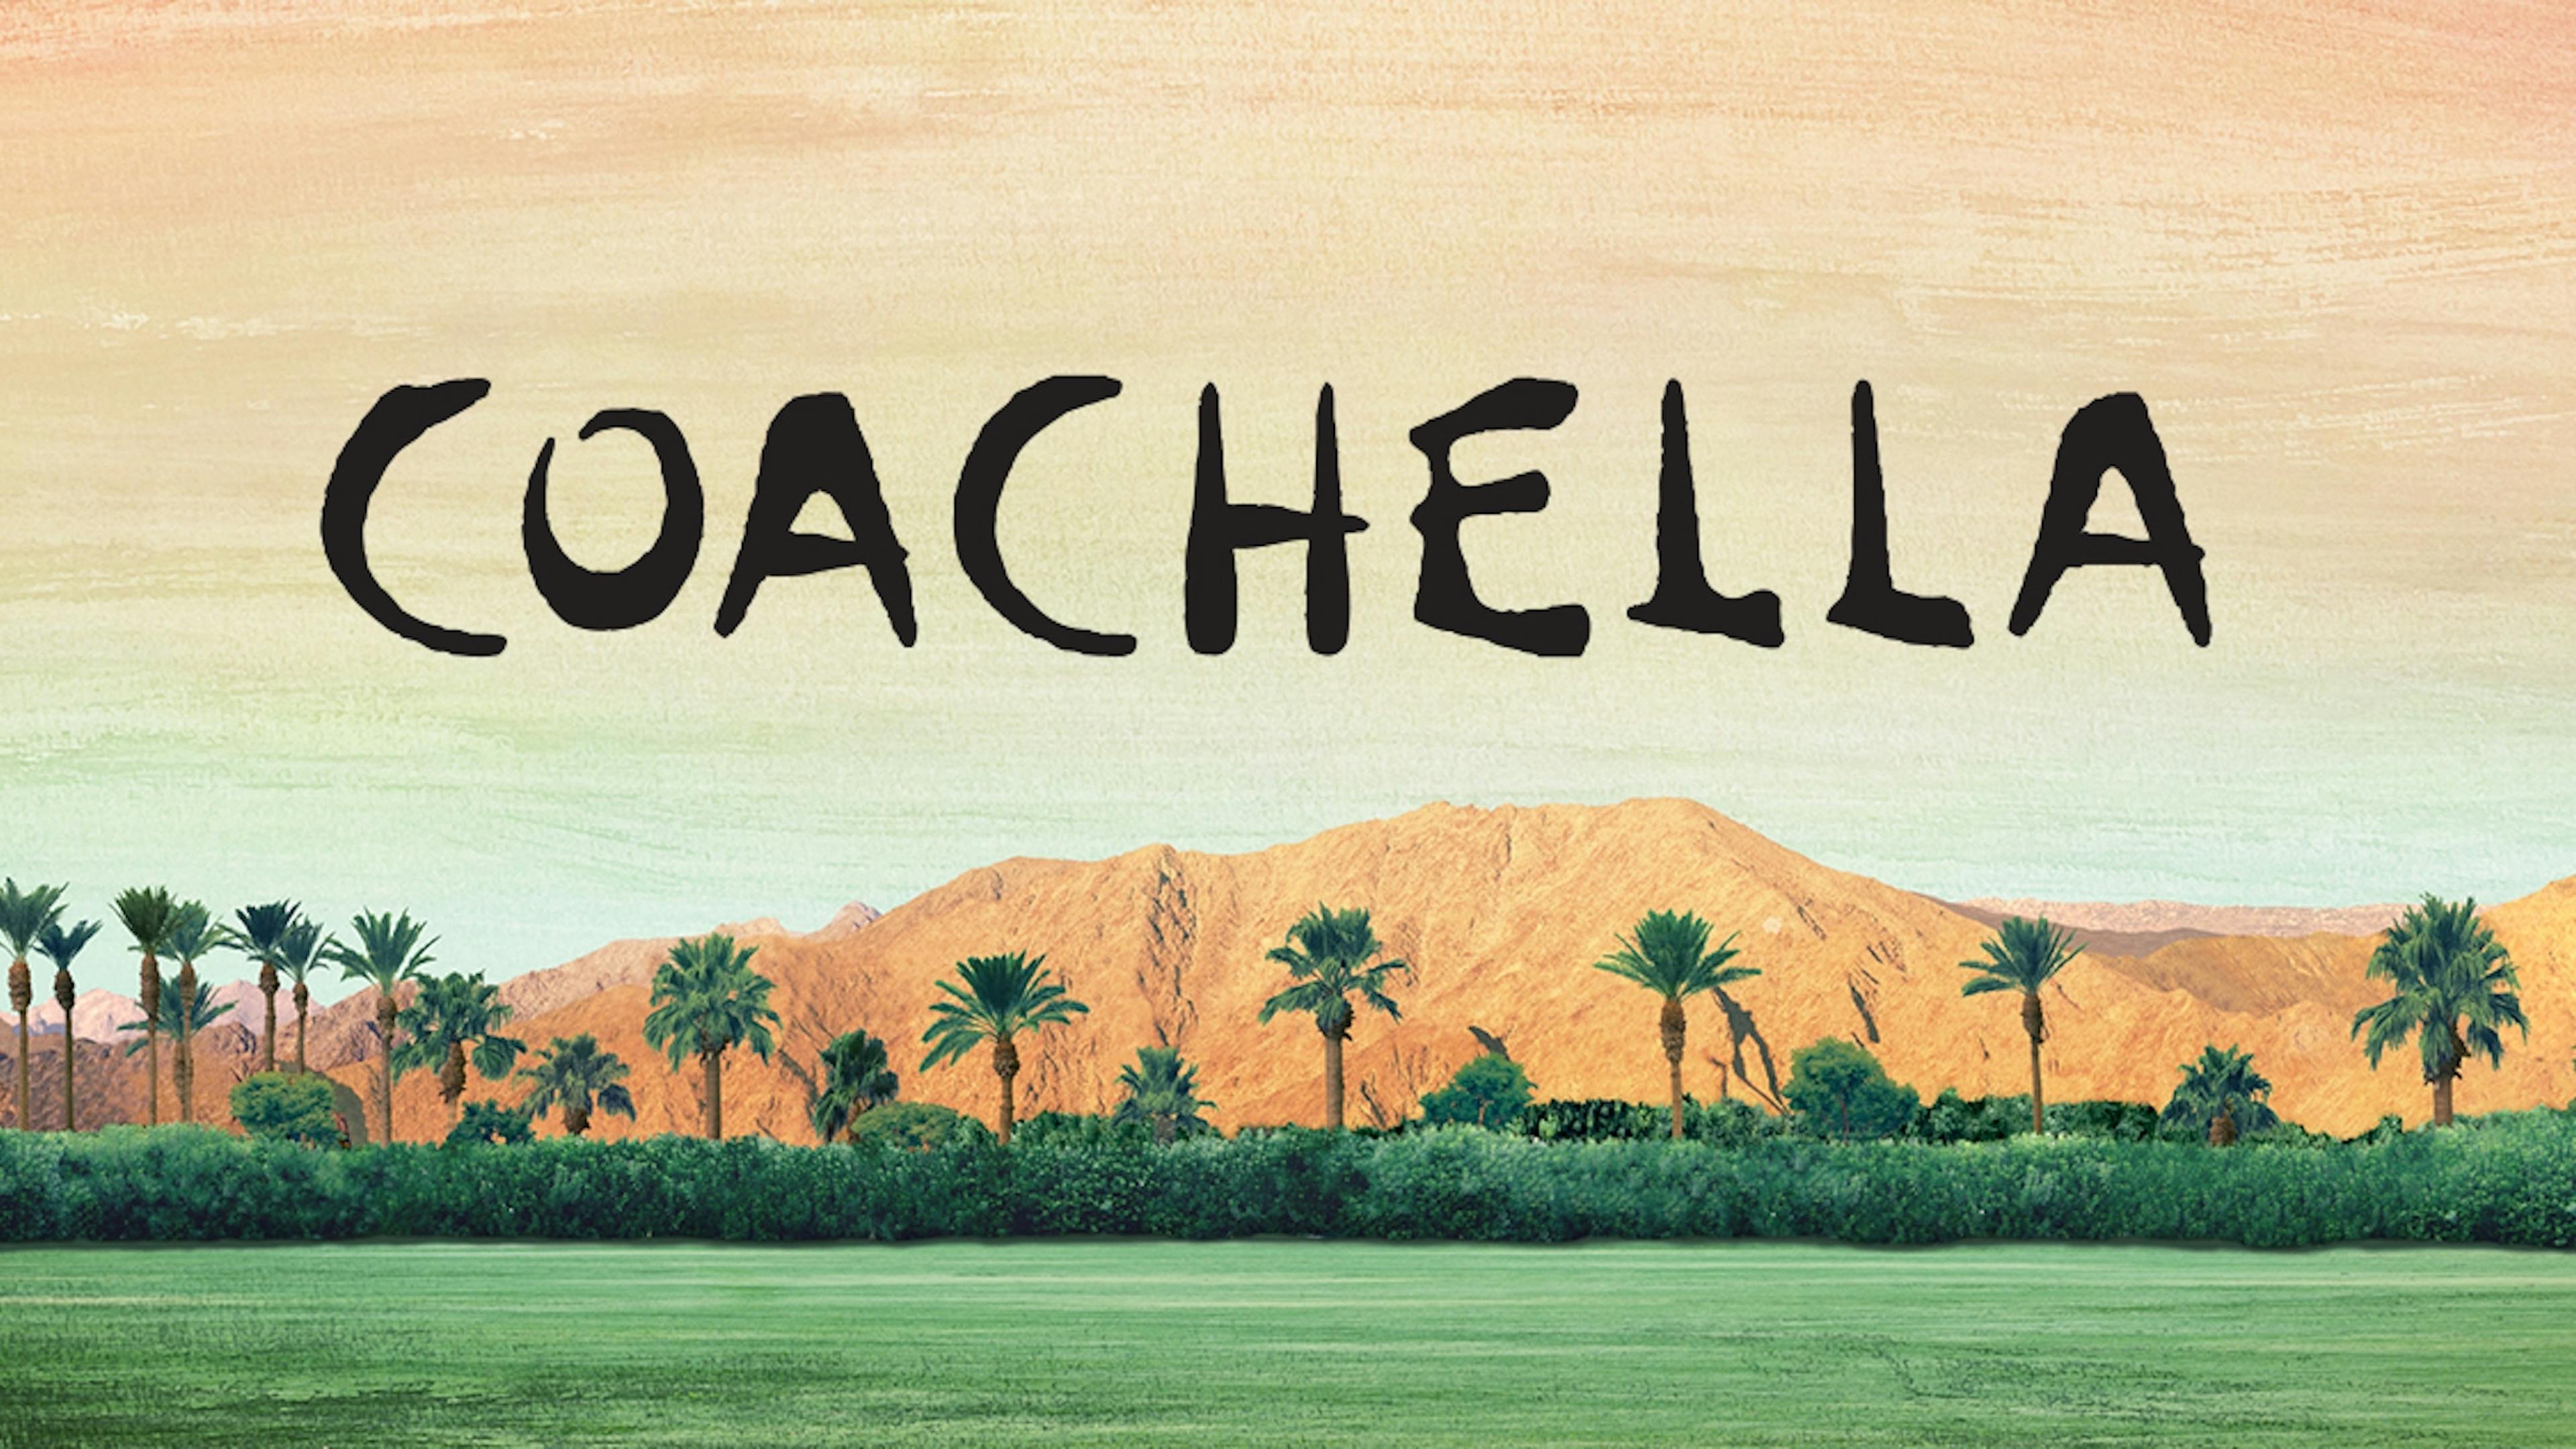 Coachella 2020 Is Officially Cancelled